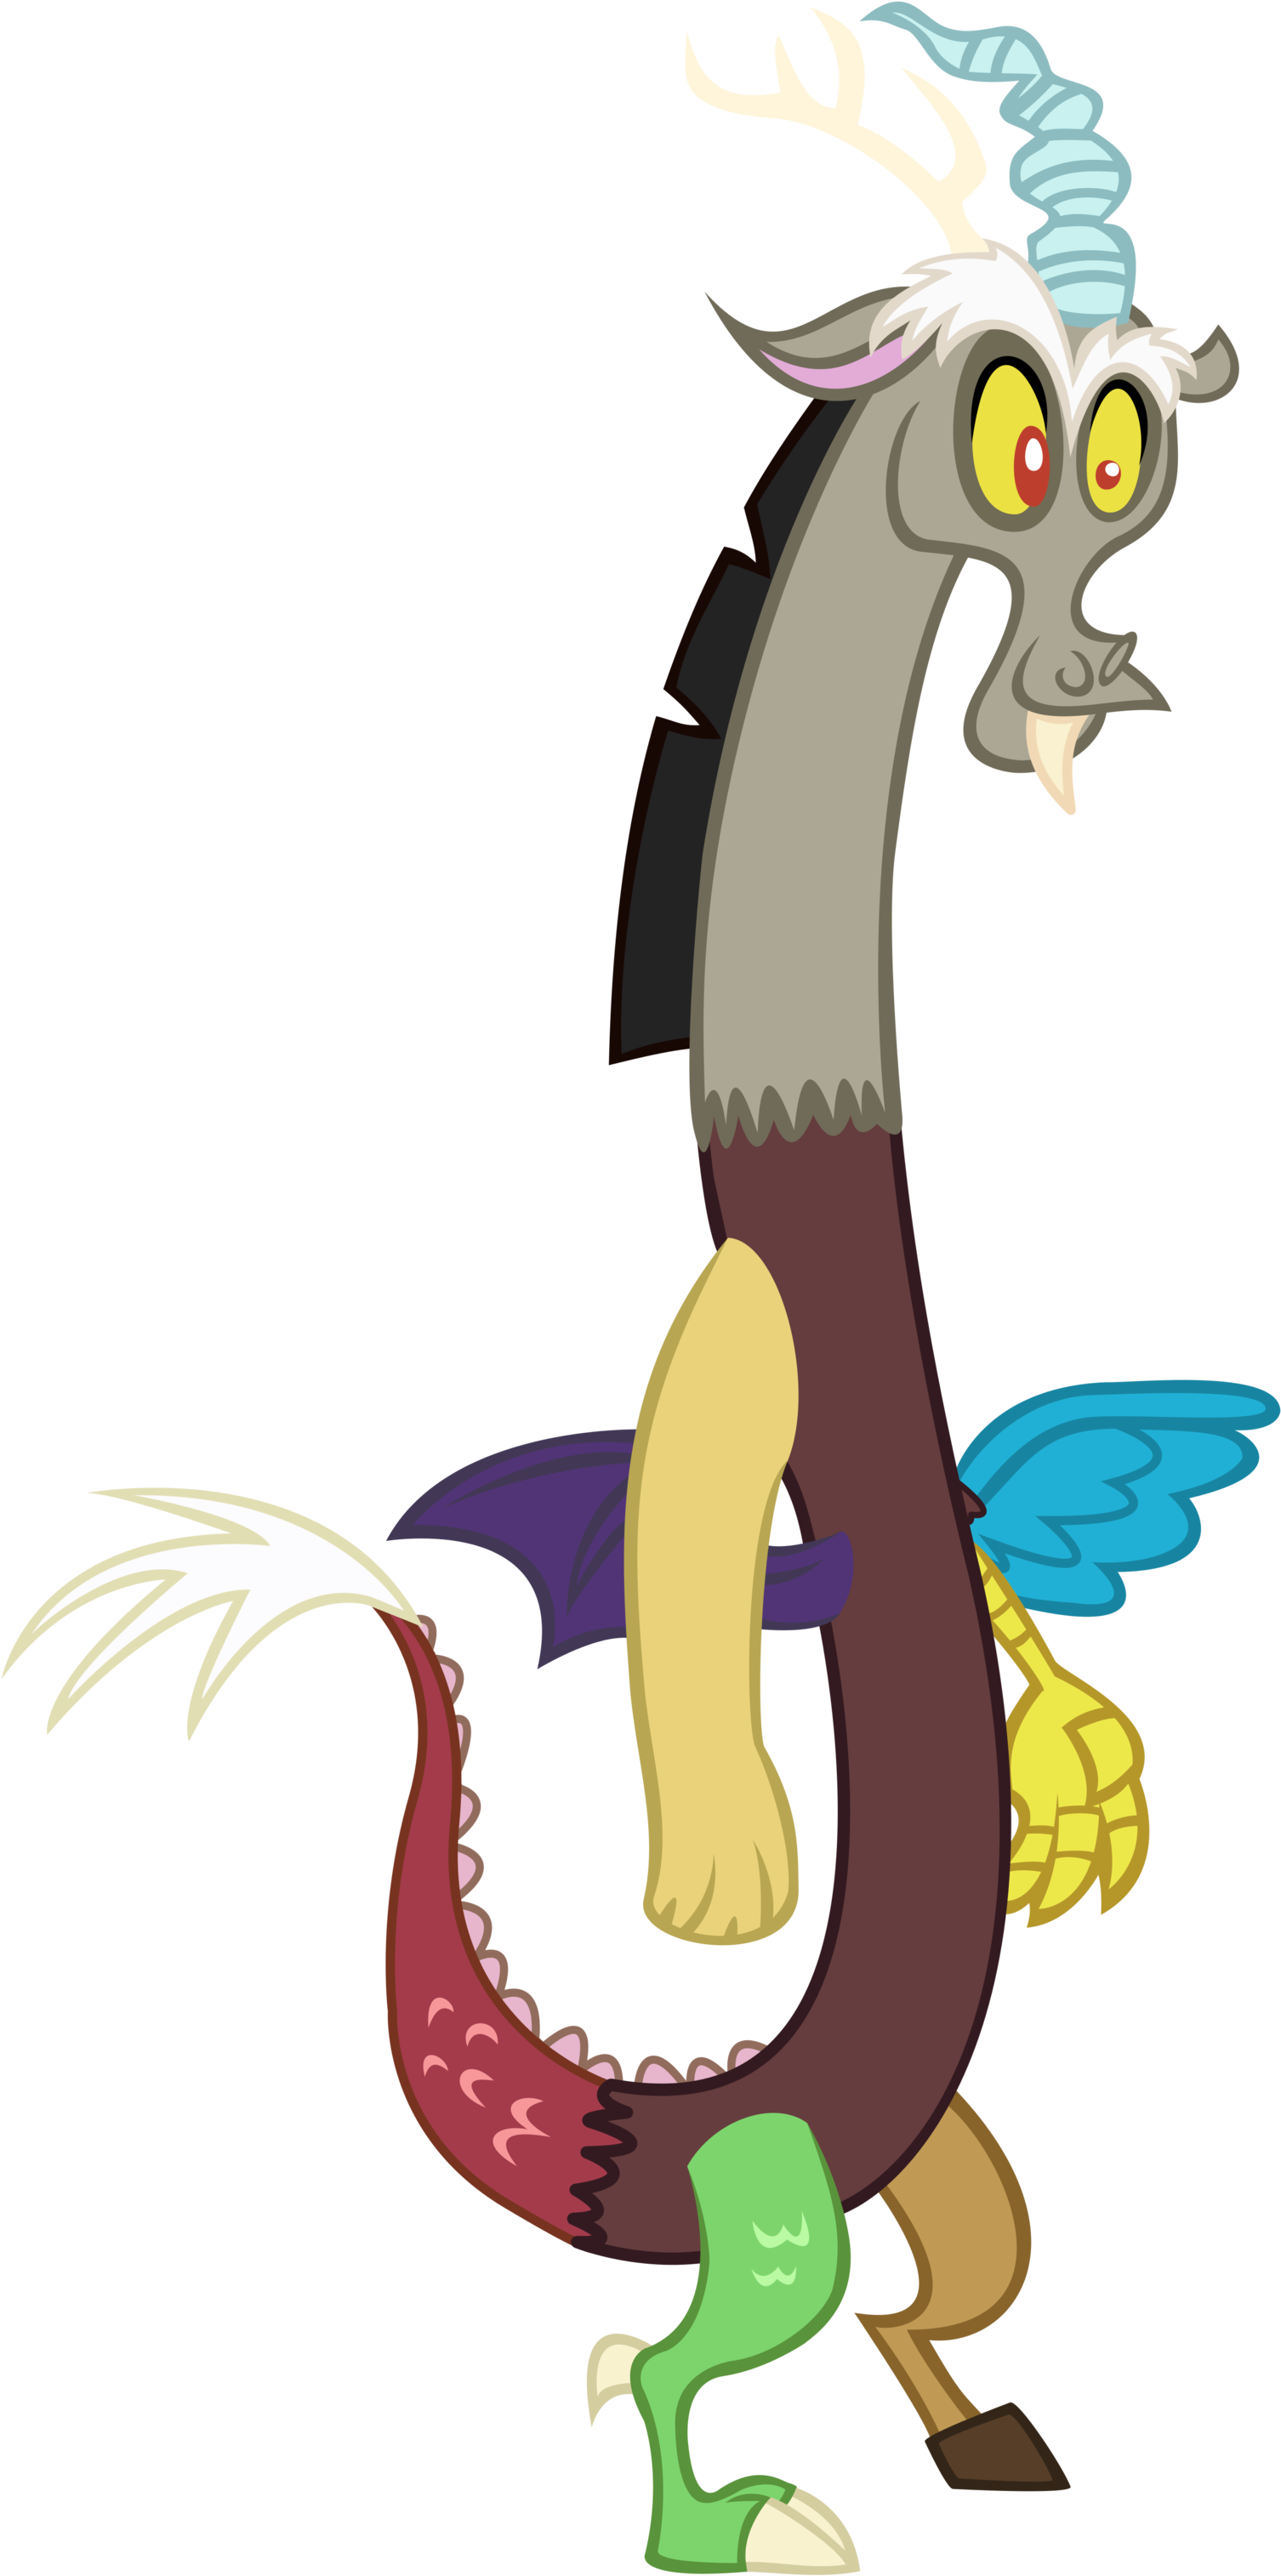 Discord - Discord From My Little Pony (1600x3118)